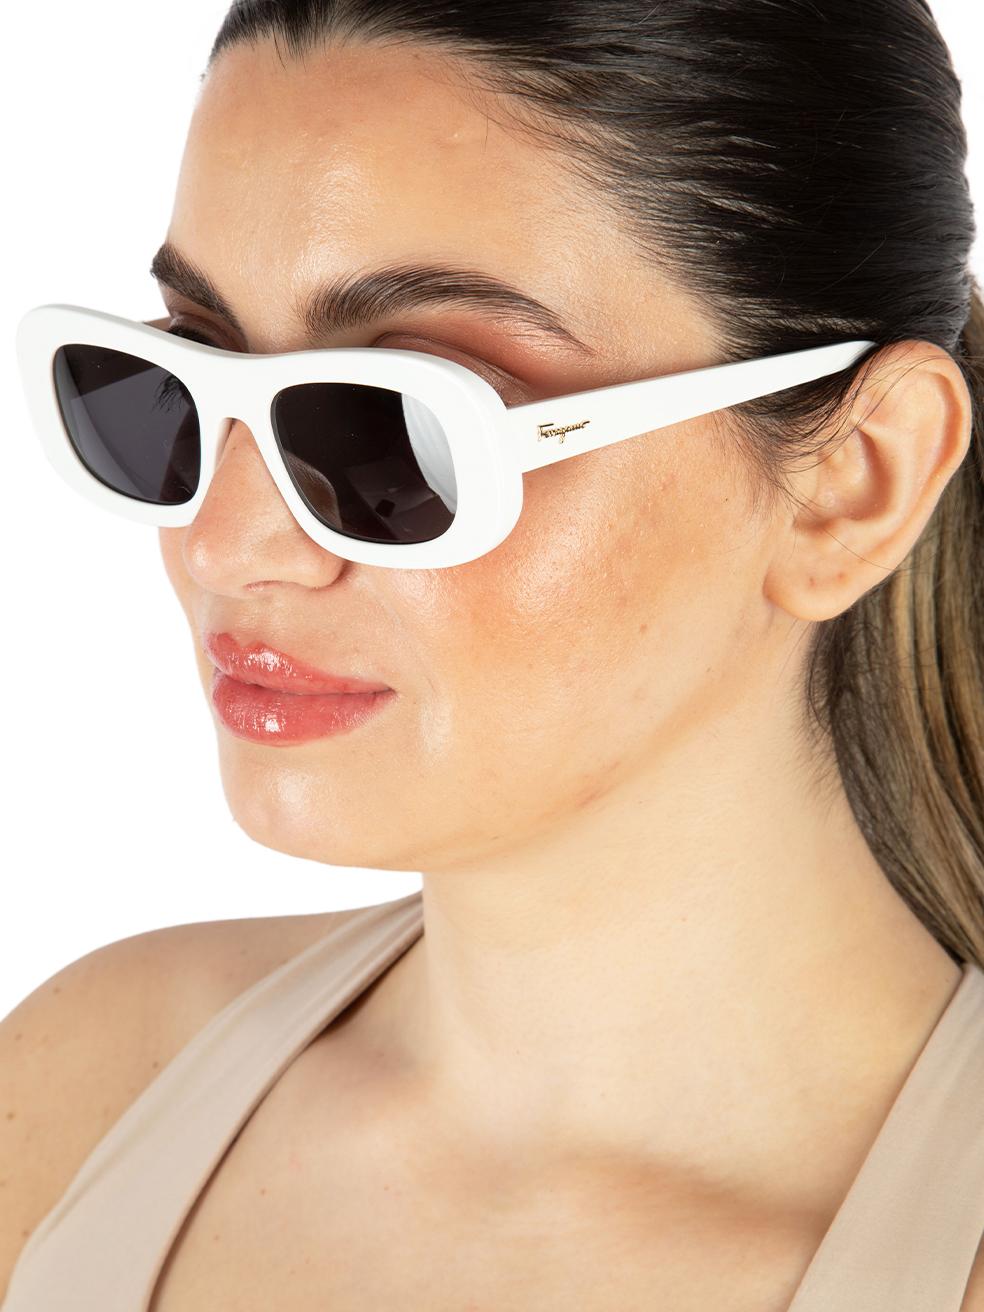 CONDITION is New with tags on this brand new Salvatore Ferragamodesigner item. This item comes with original packaging.
 
 
 
 Details
 
 
 Model: SF1046S
 
 Season: JAN2022
 
 White
 
 Acetate
 
 Rectangle Sunglasses
 
 Grey Tinted Lens
 
